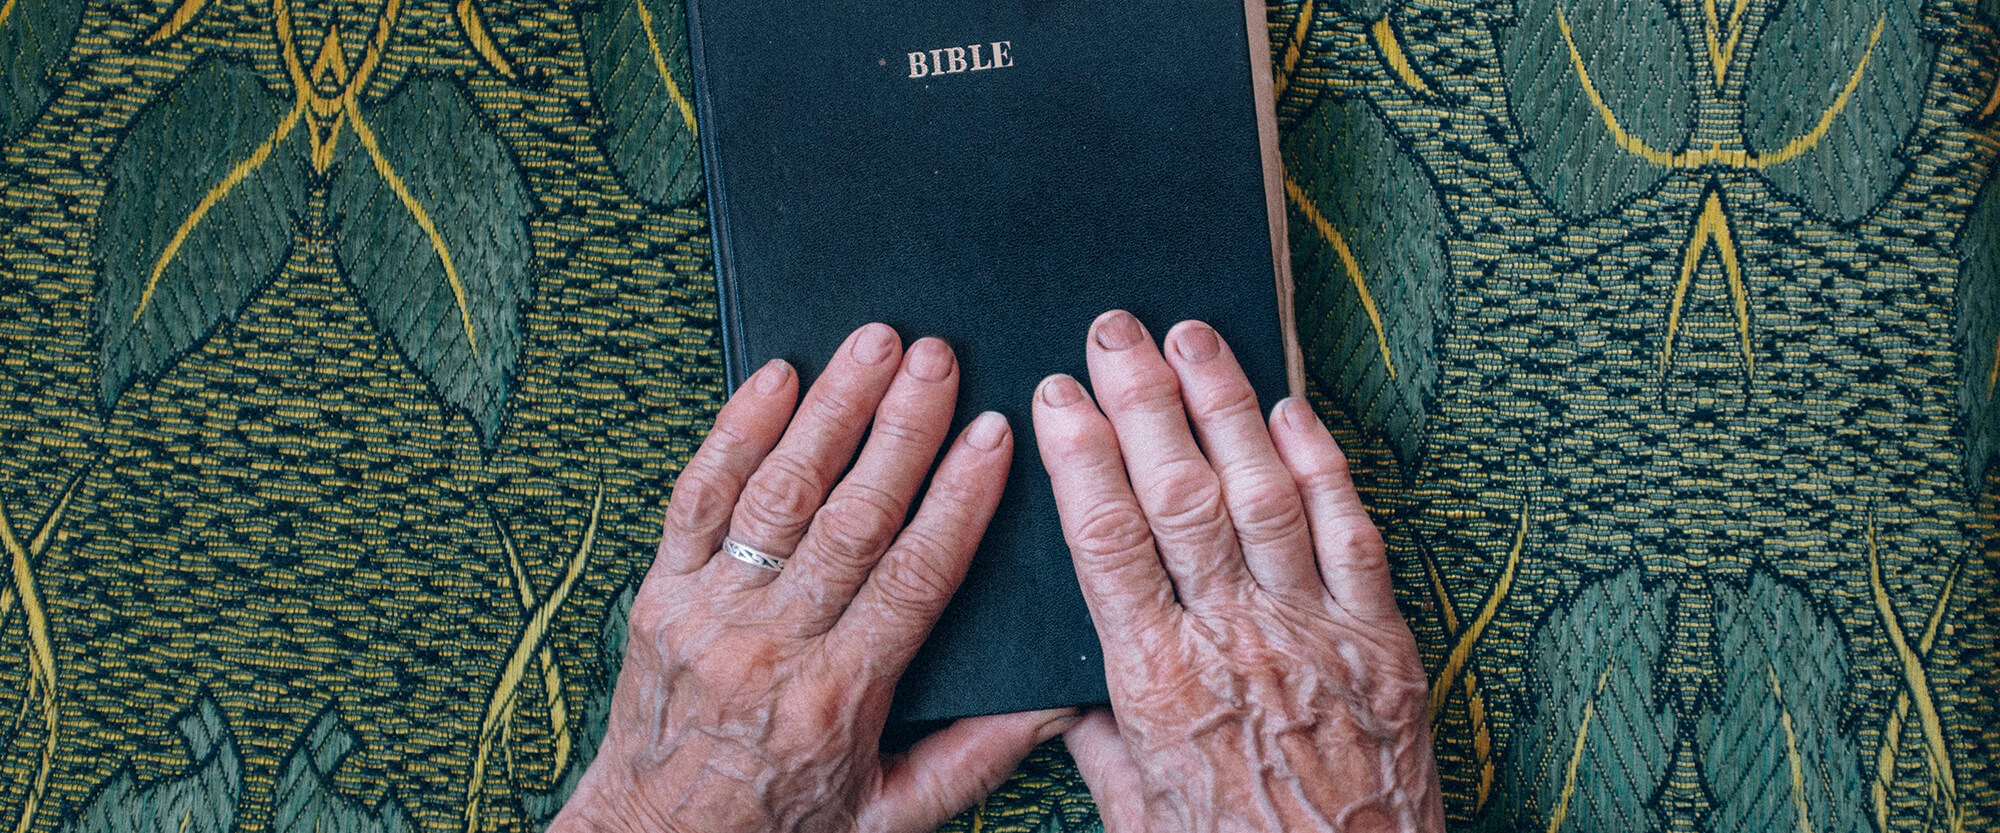 Hands on a Bible